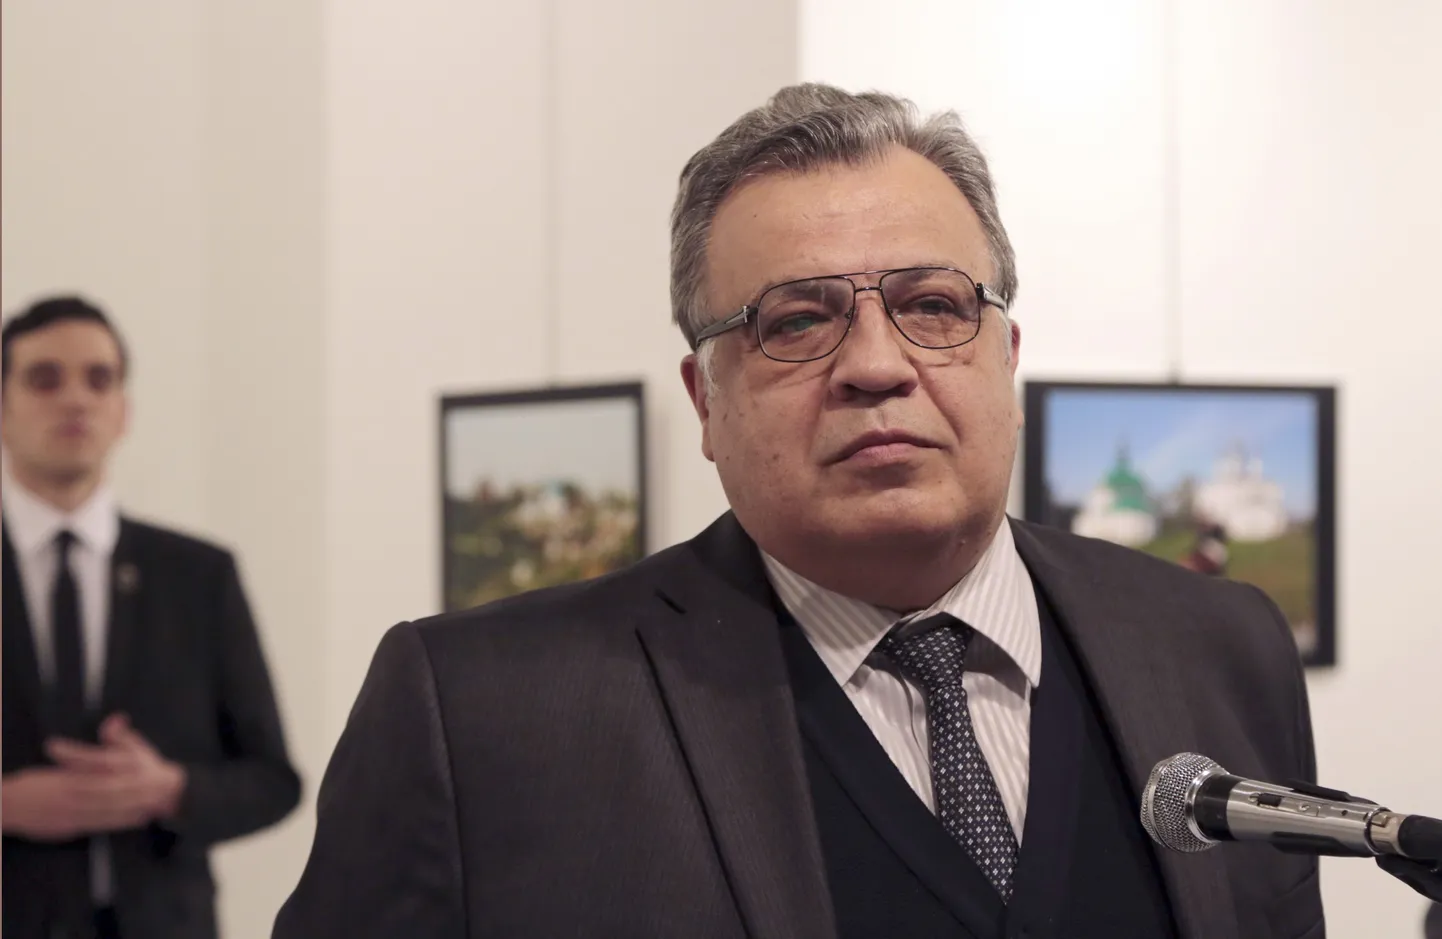 Andrei Karlov, the Russian Ambassador to Turkey, speaks at a photo exhibition in Ankara on Monday, Dec. 19, 2016, moments before a gunman opened fire on him. Karlov was rushed to a hospital after the attack and later died from his gunshot wounds.  The gunman is seen at rear on the left.  (AP Photo/Burhan Ozbilici)